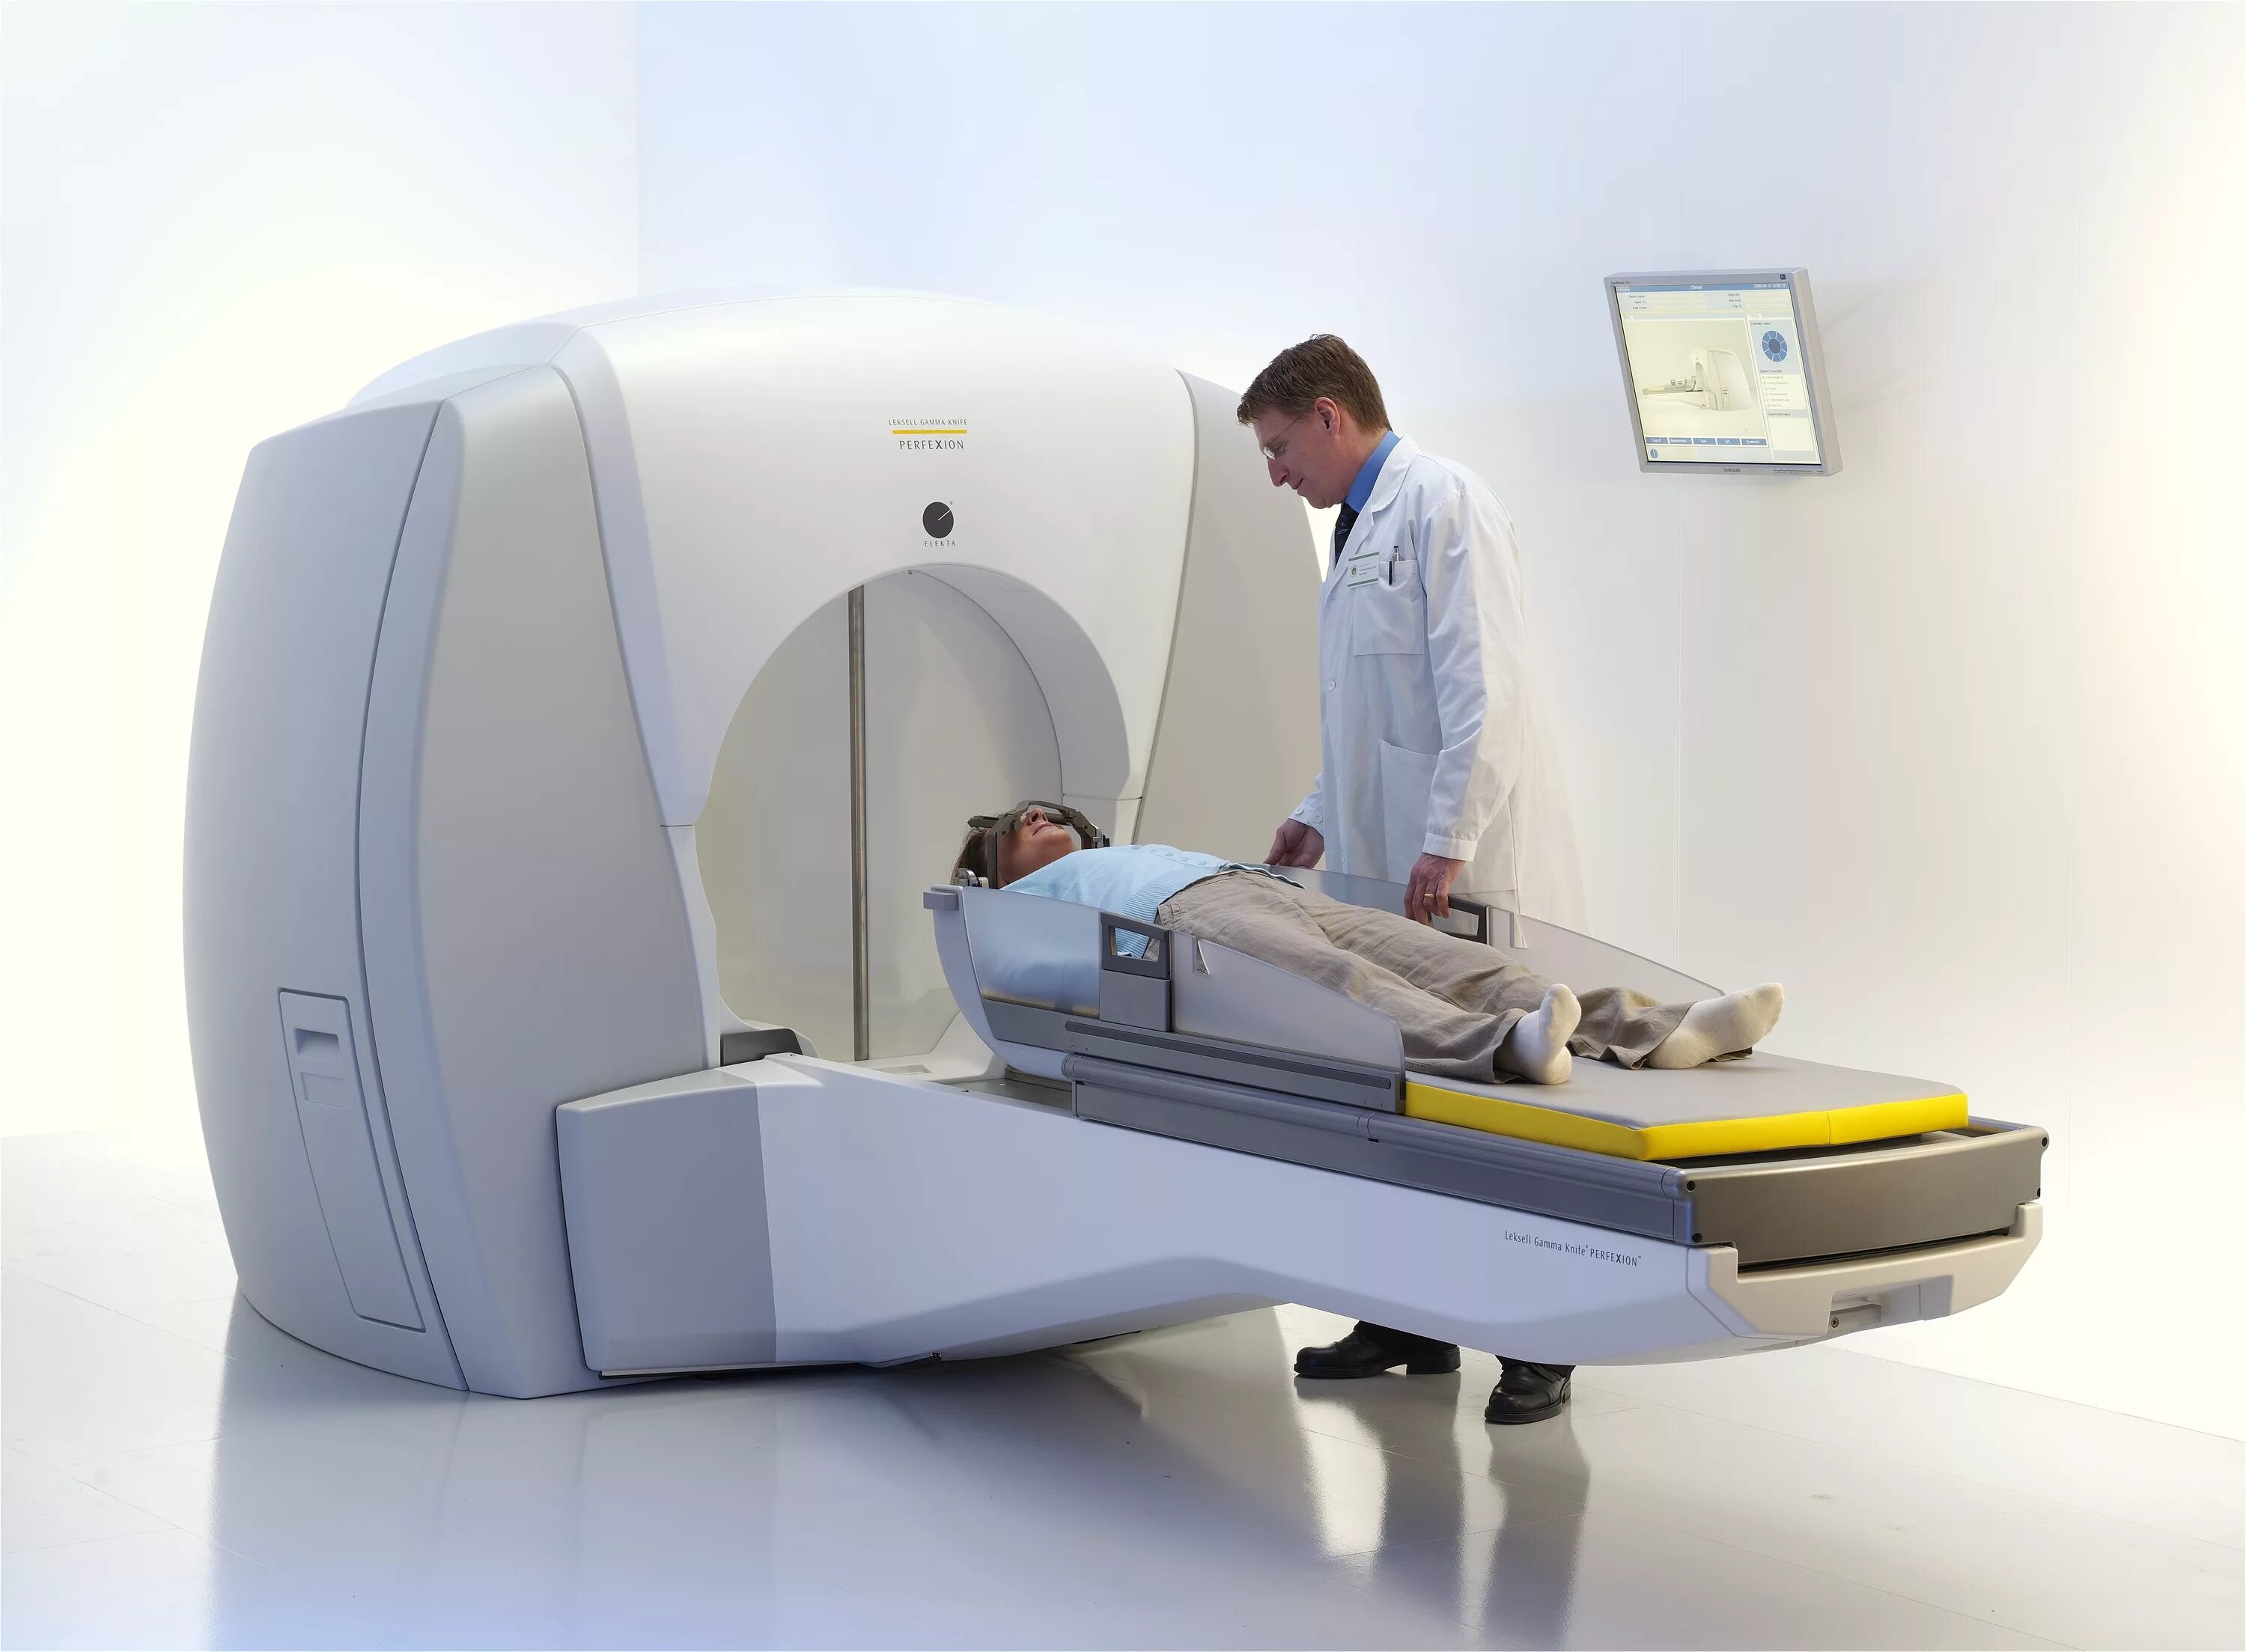 Гамма-нож (Leksell Gamma Knife). Leksell Gamma Knife Perfexion. * Stereotactic Radiosurgery/Gamma Knife Radiosurgery. Применение радиации в медицине